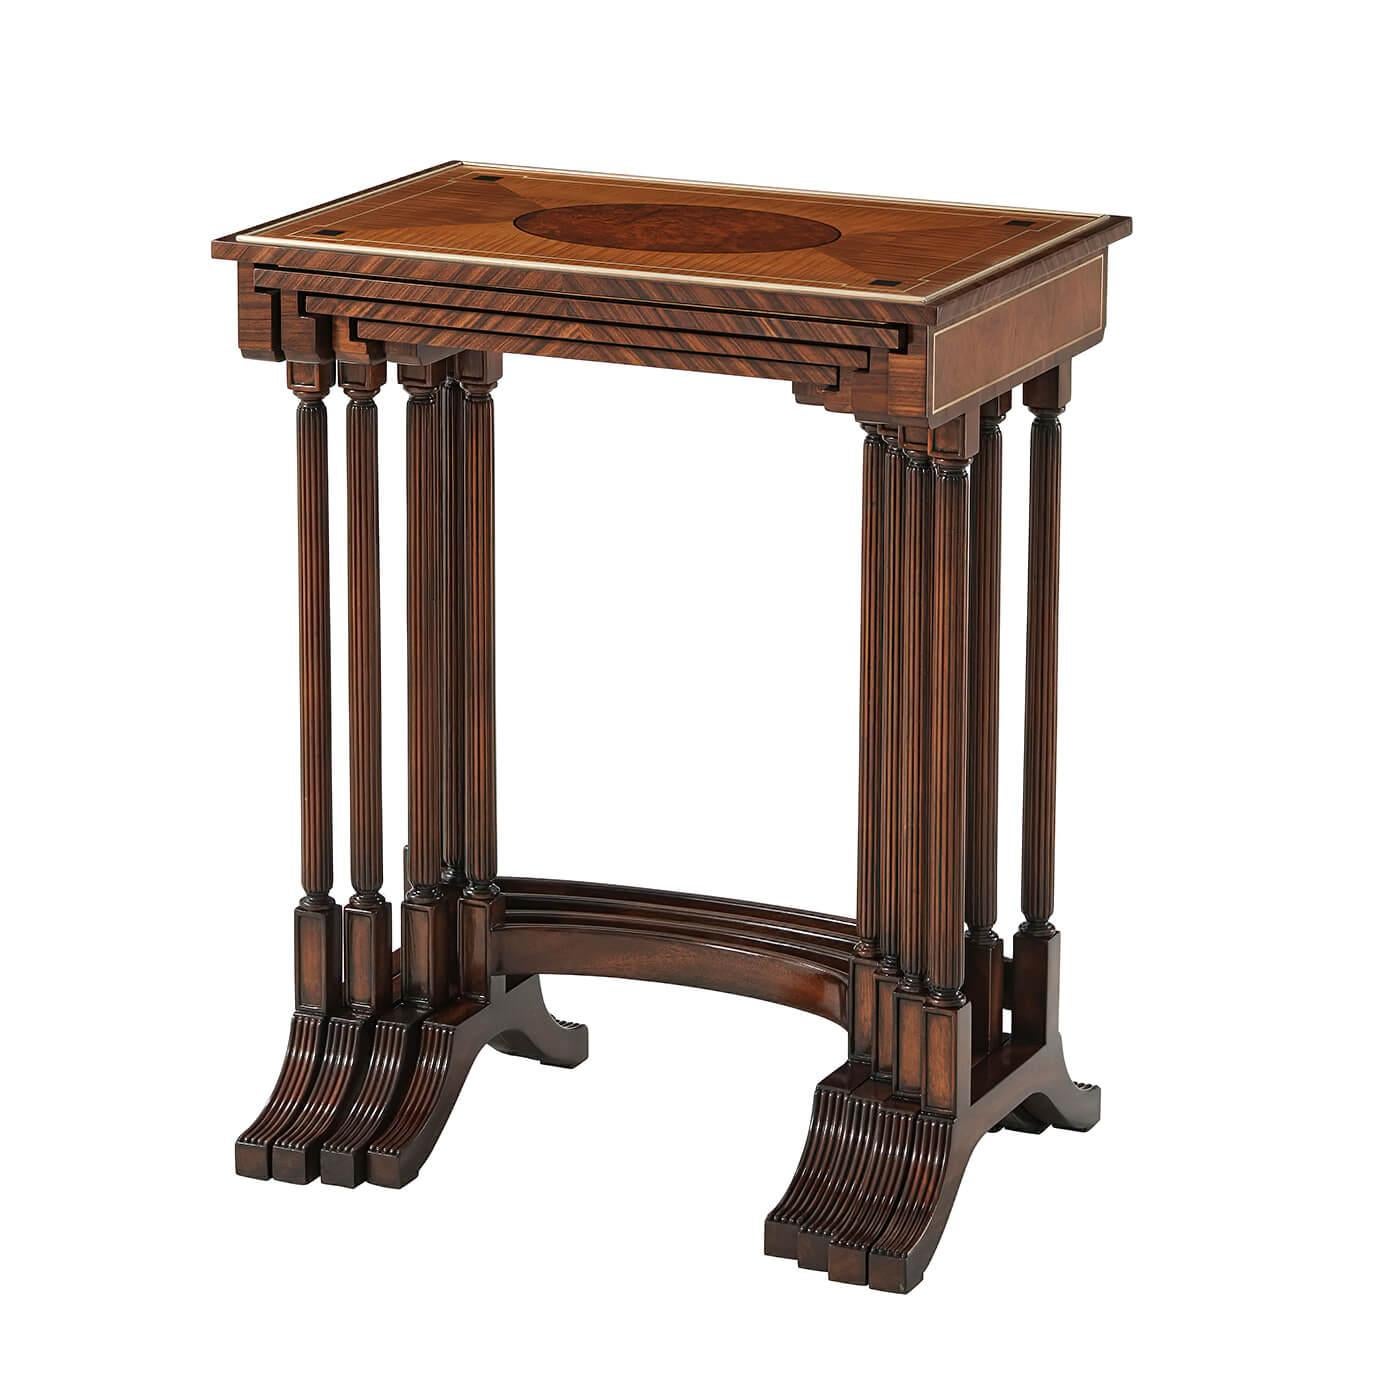 Regency style nest of tables a nest of four mahogany and inlaid quartetto tables, the rectangular tops each with an amboyna burl oval inlaid into Amarello veneer, strung with brass and with a brass moulding and rosewood crossbanding, above mahogany